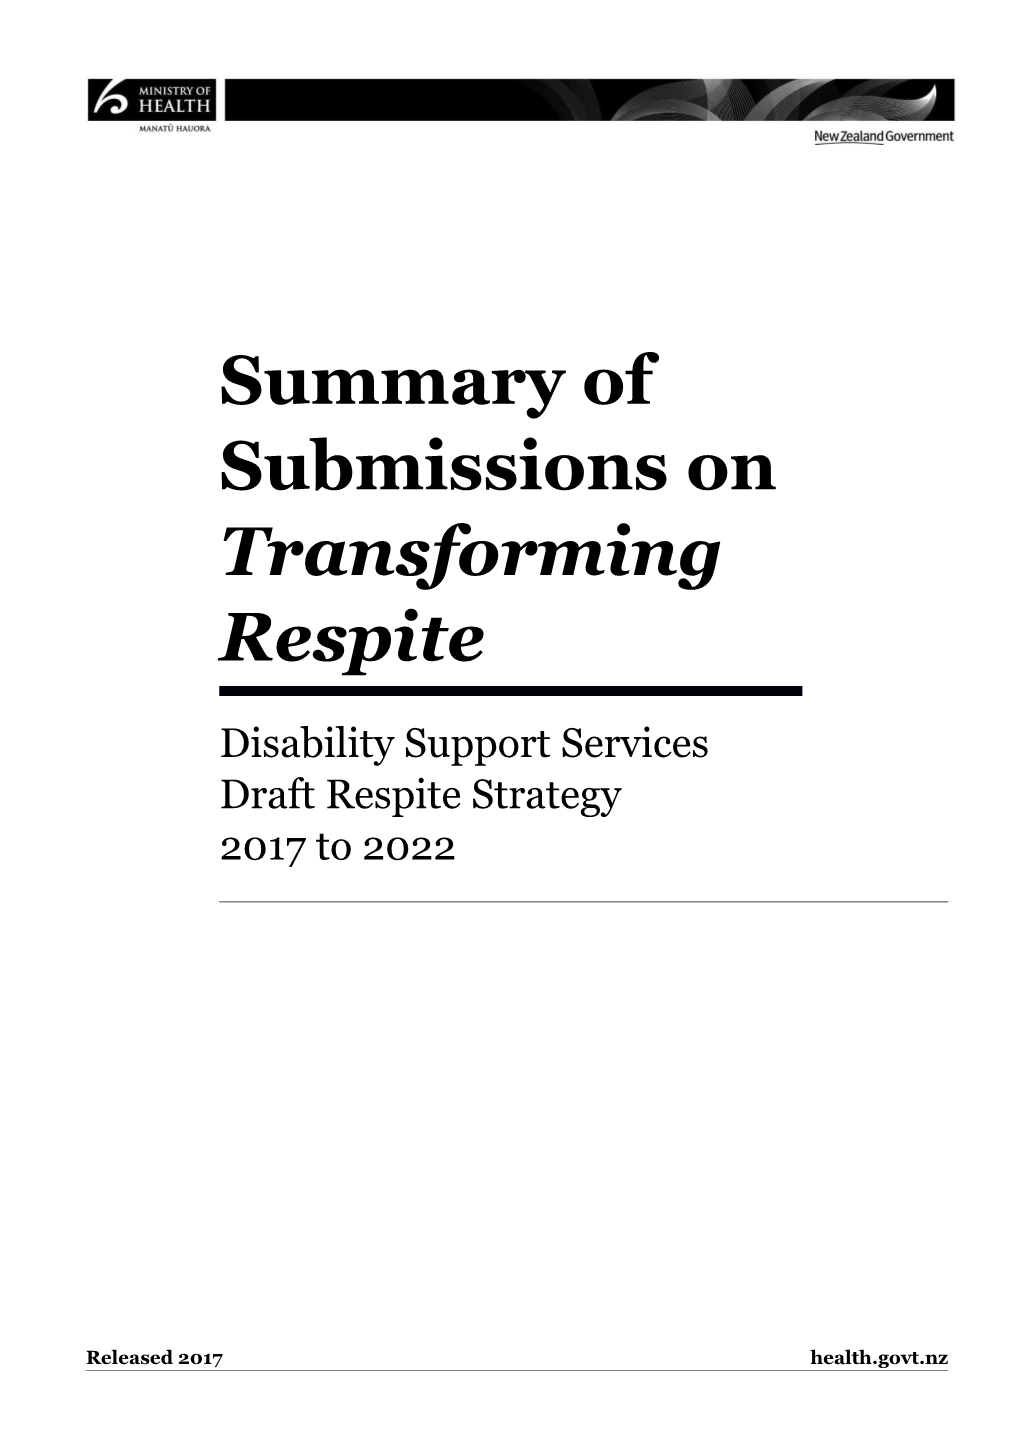 Summary of Submissions on Transforming Respite